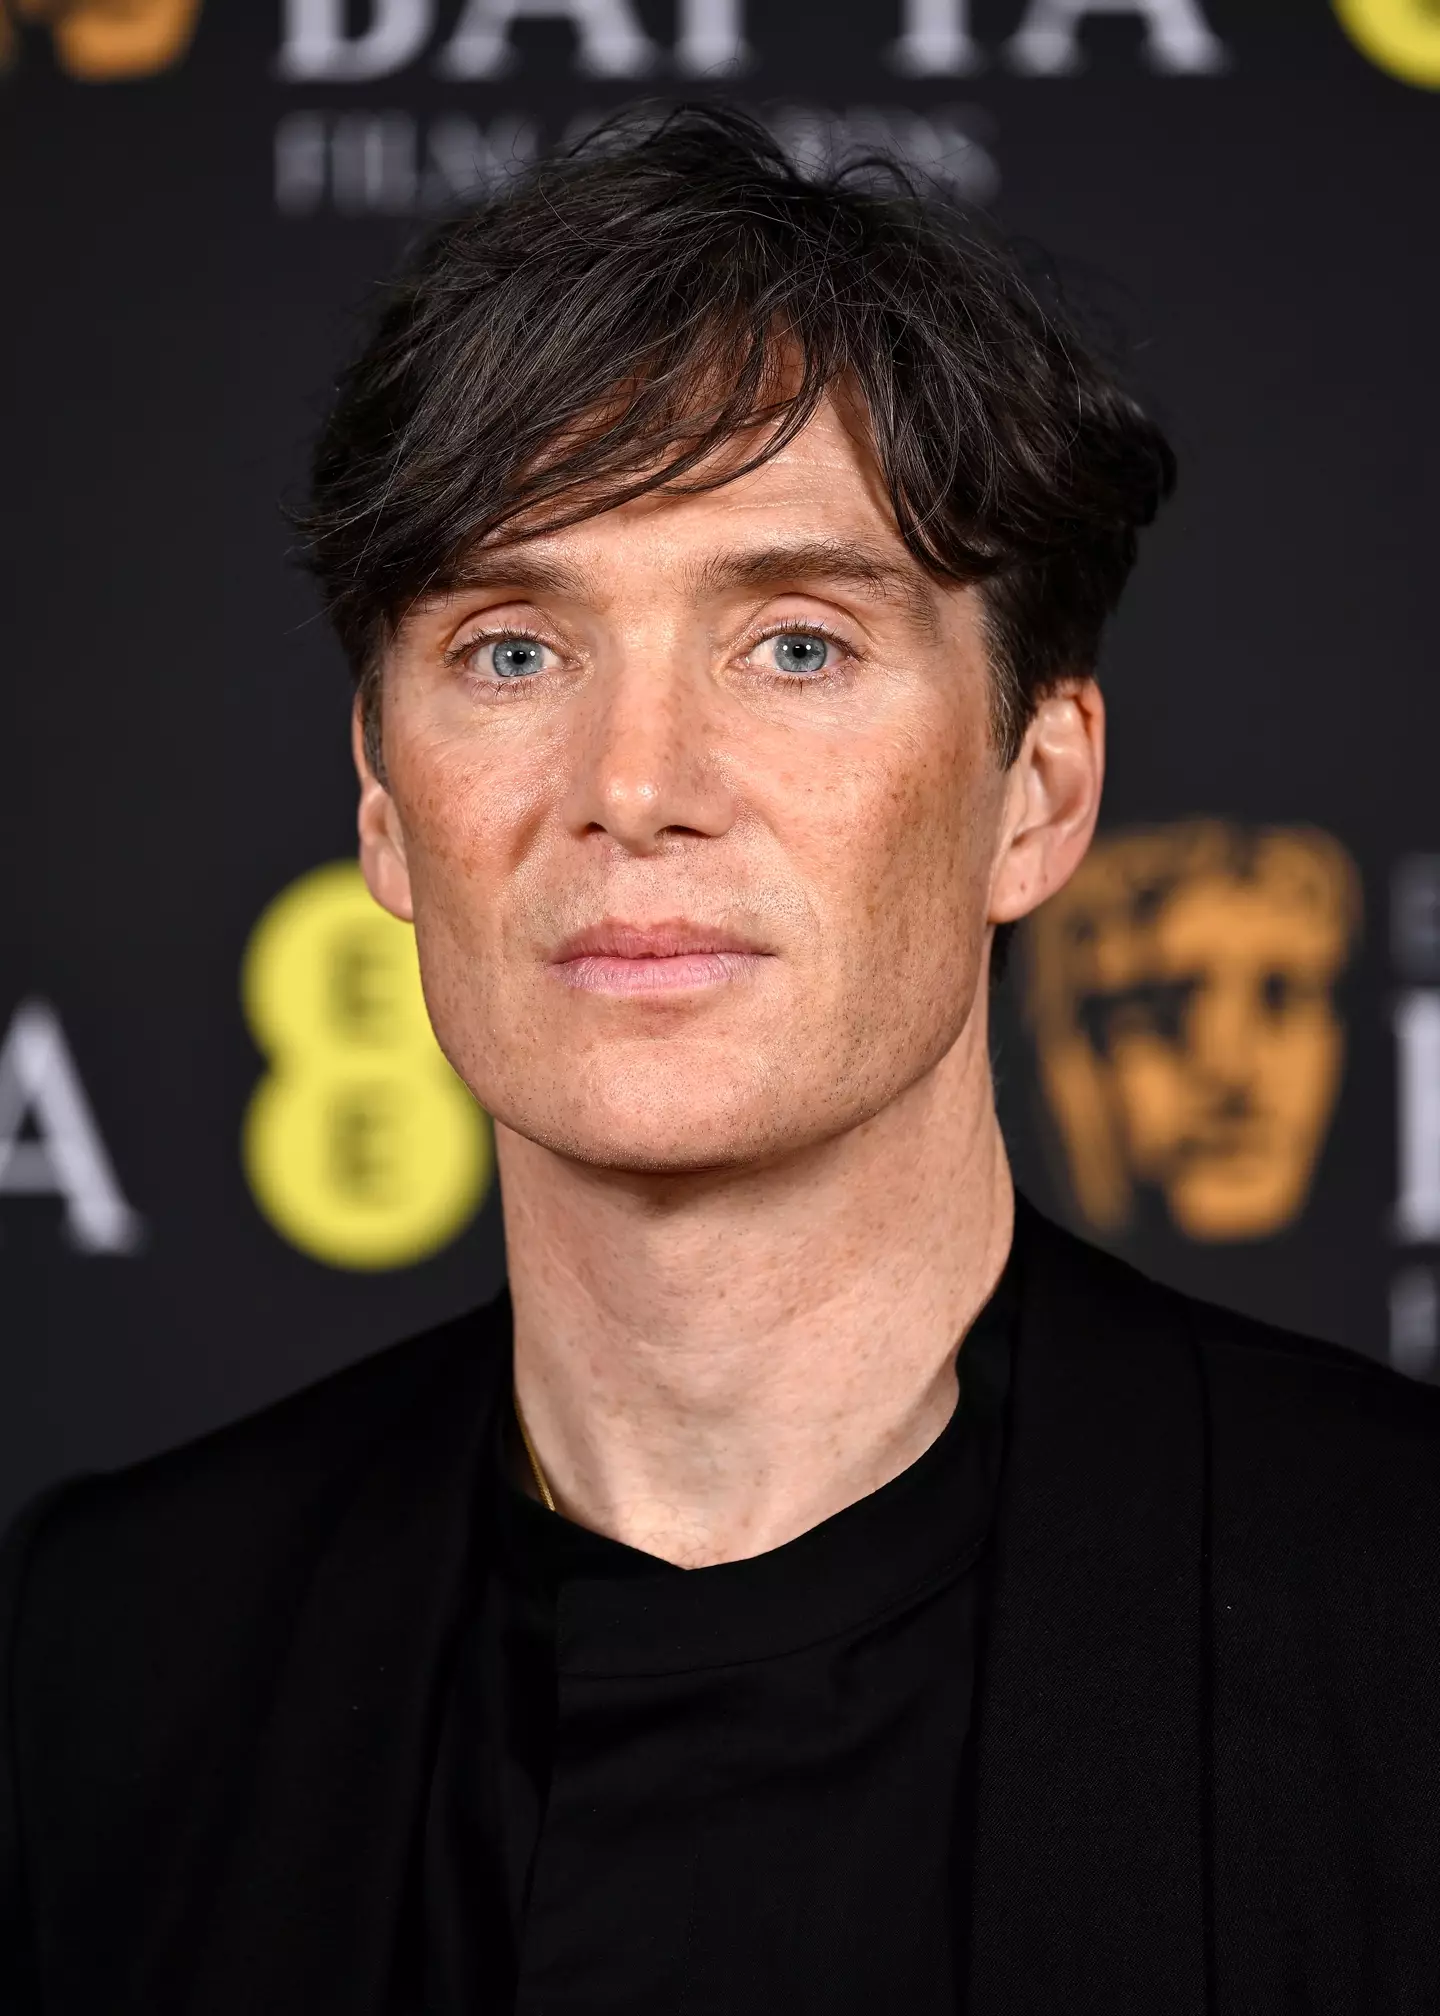 Cillian Murphy scooped up the award for Best Leading Actor at the Baftas.